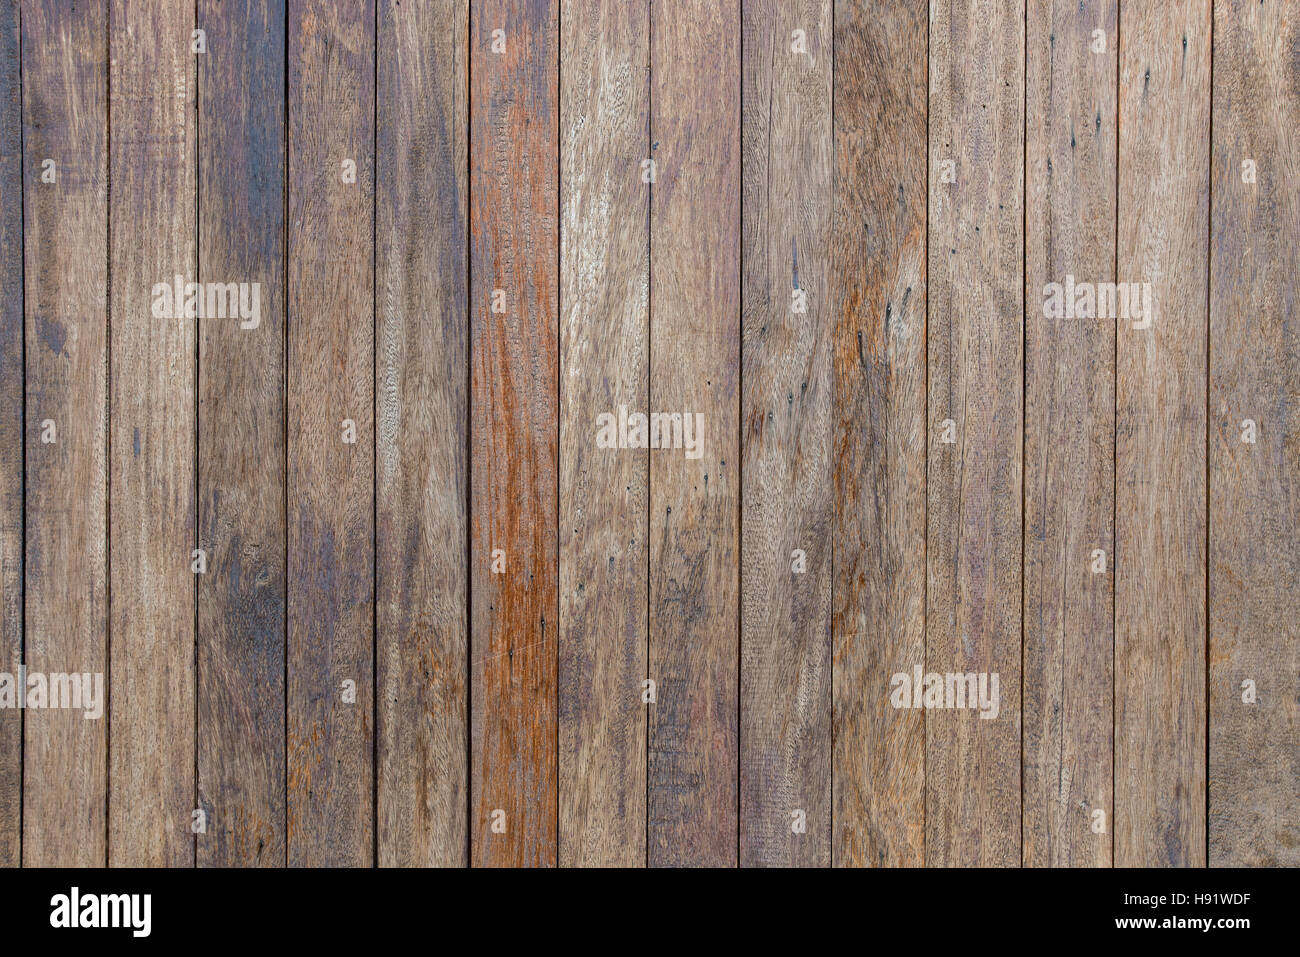 timber wood brown oak panels used as background Stock Photo